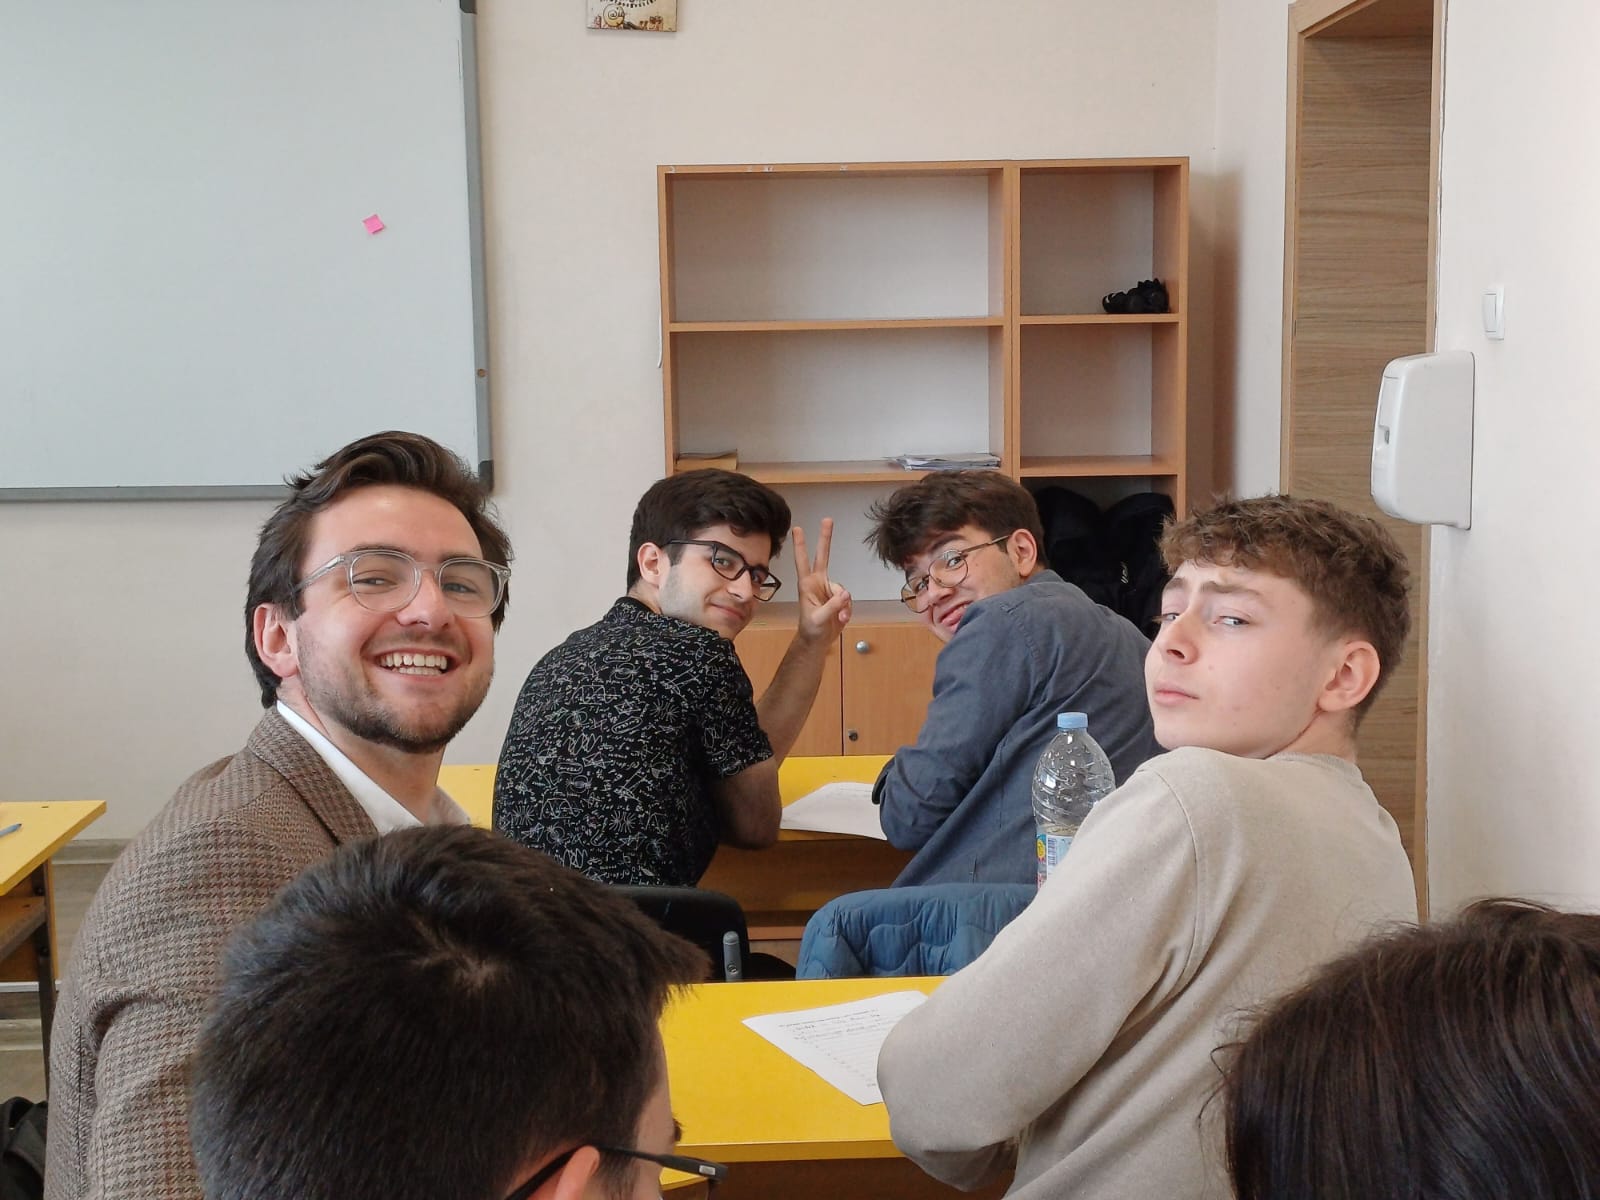 Corby (left) working one-on-one with students through his Fulbright teaching position.